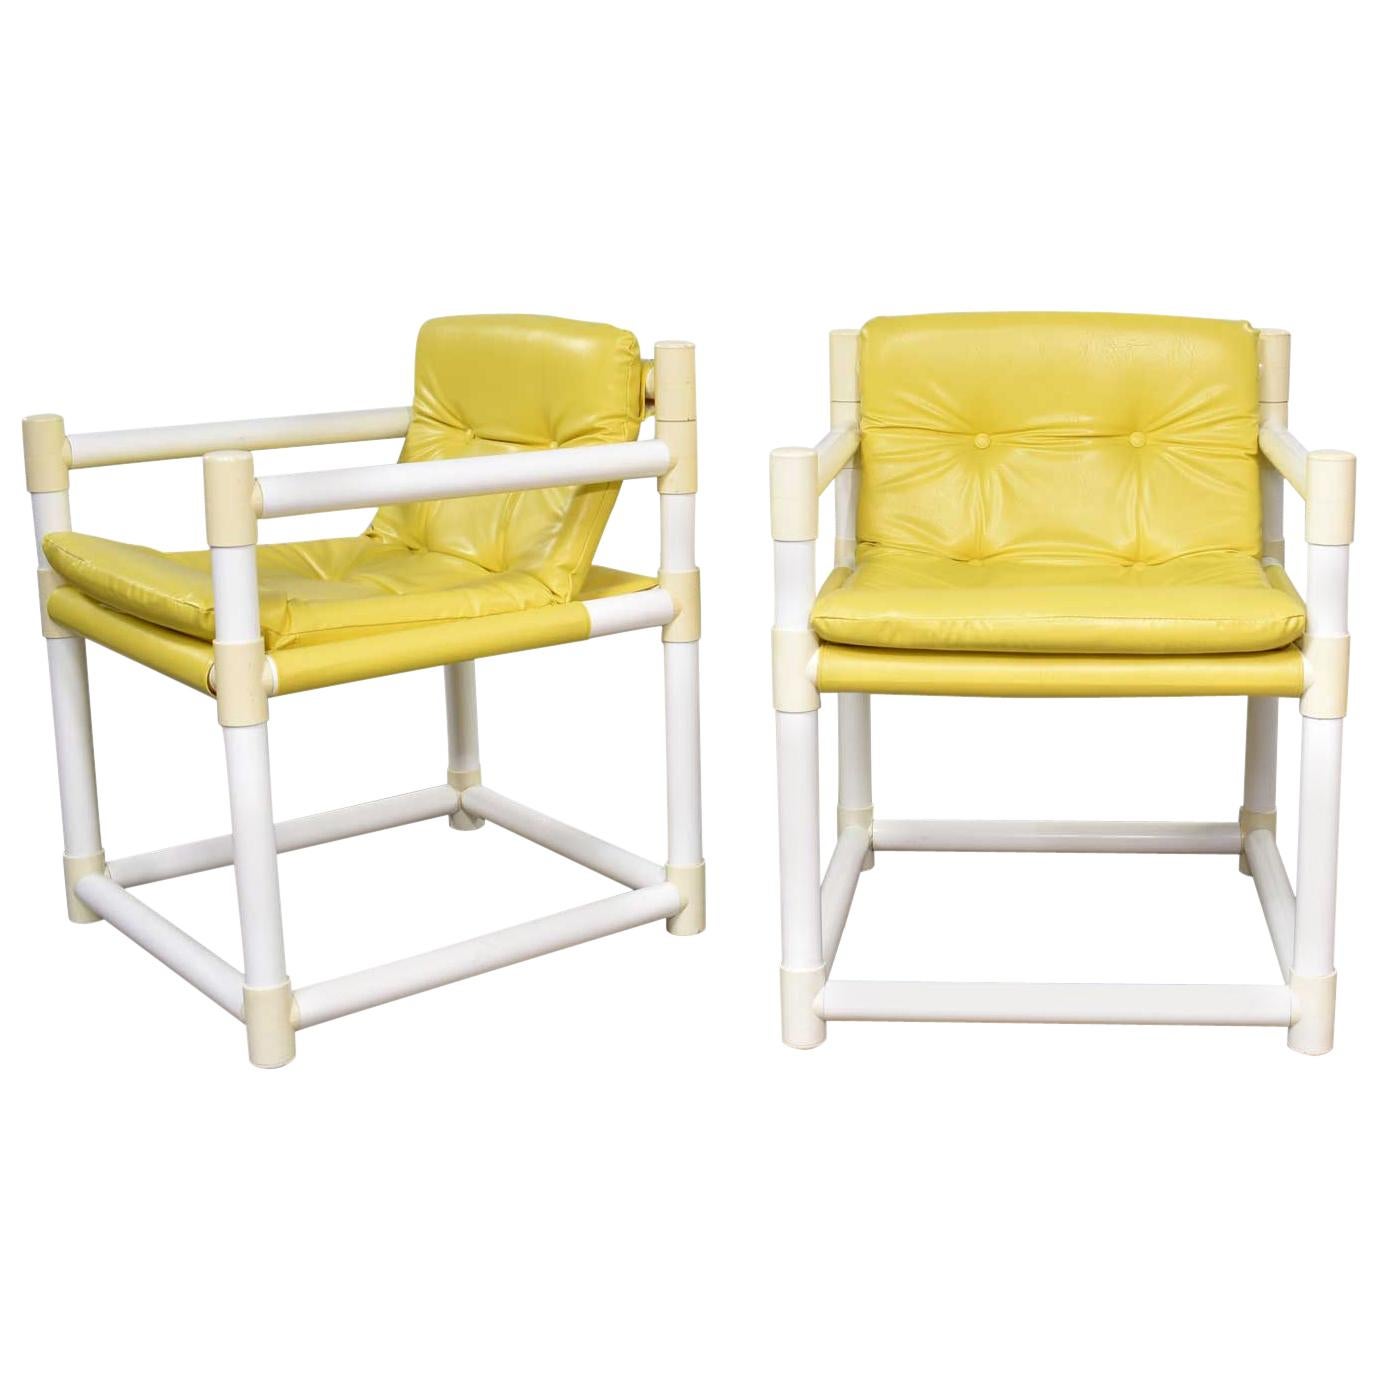 MCM Outdoor PVC Side Chairs Yellow Vinyl Upholstery, Decorion Fun Furnish, Pair